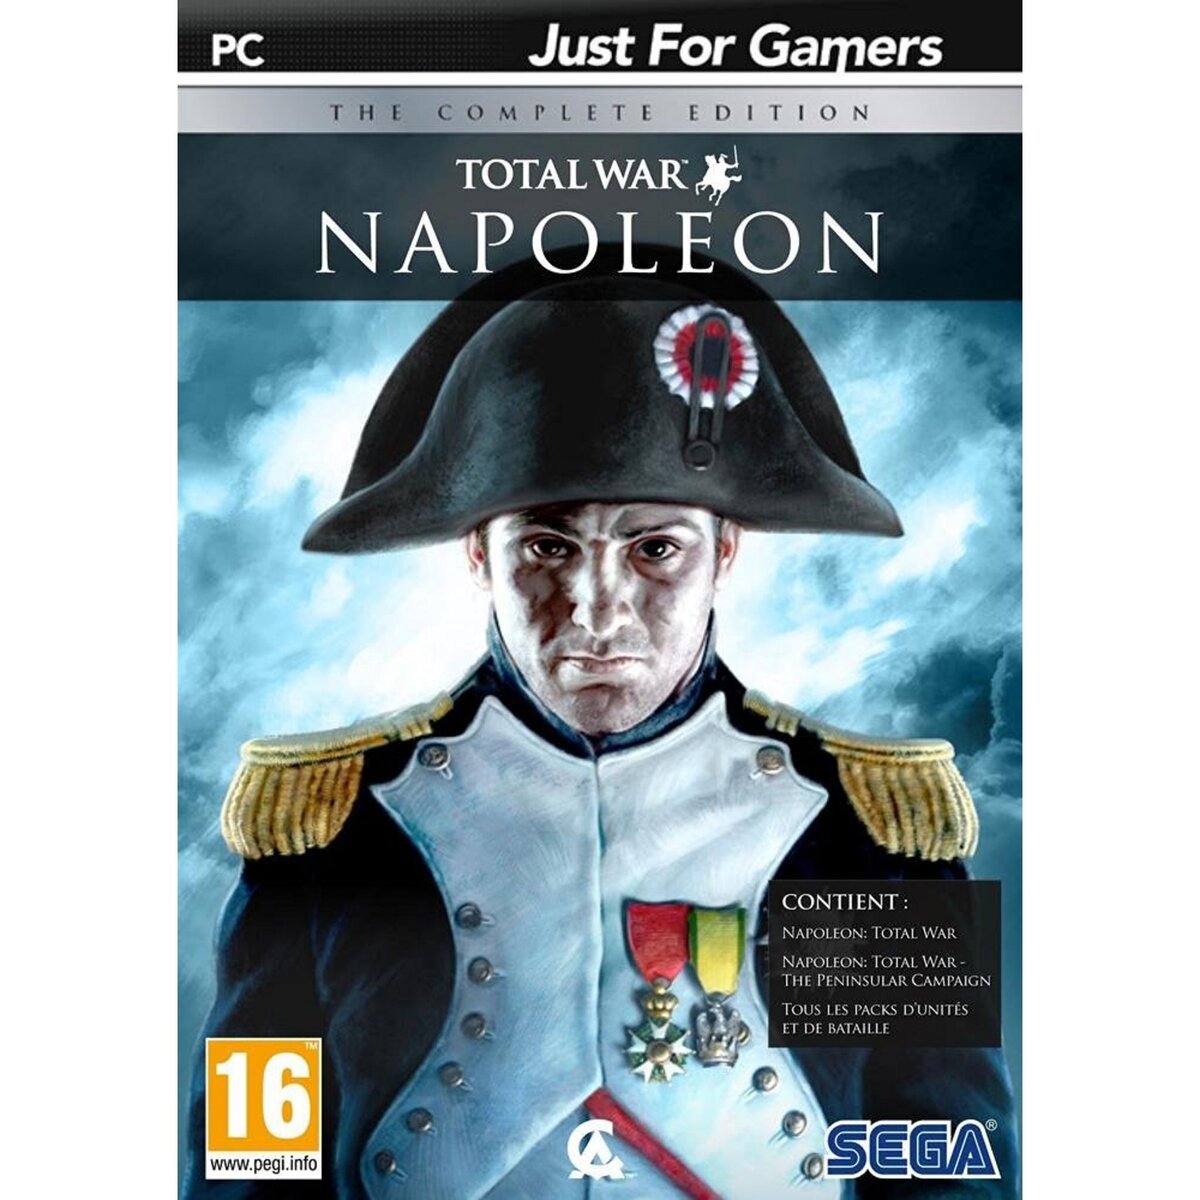 Napoleon : Total War - The Complete Edition PC